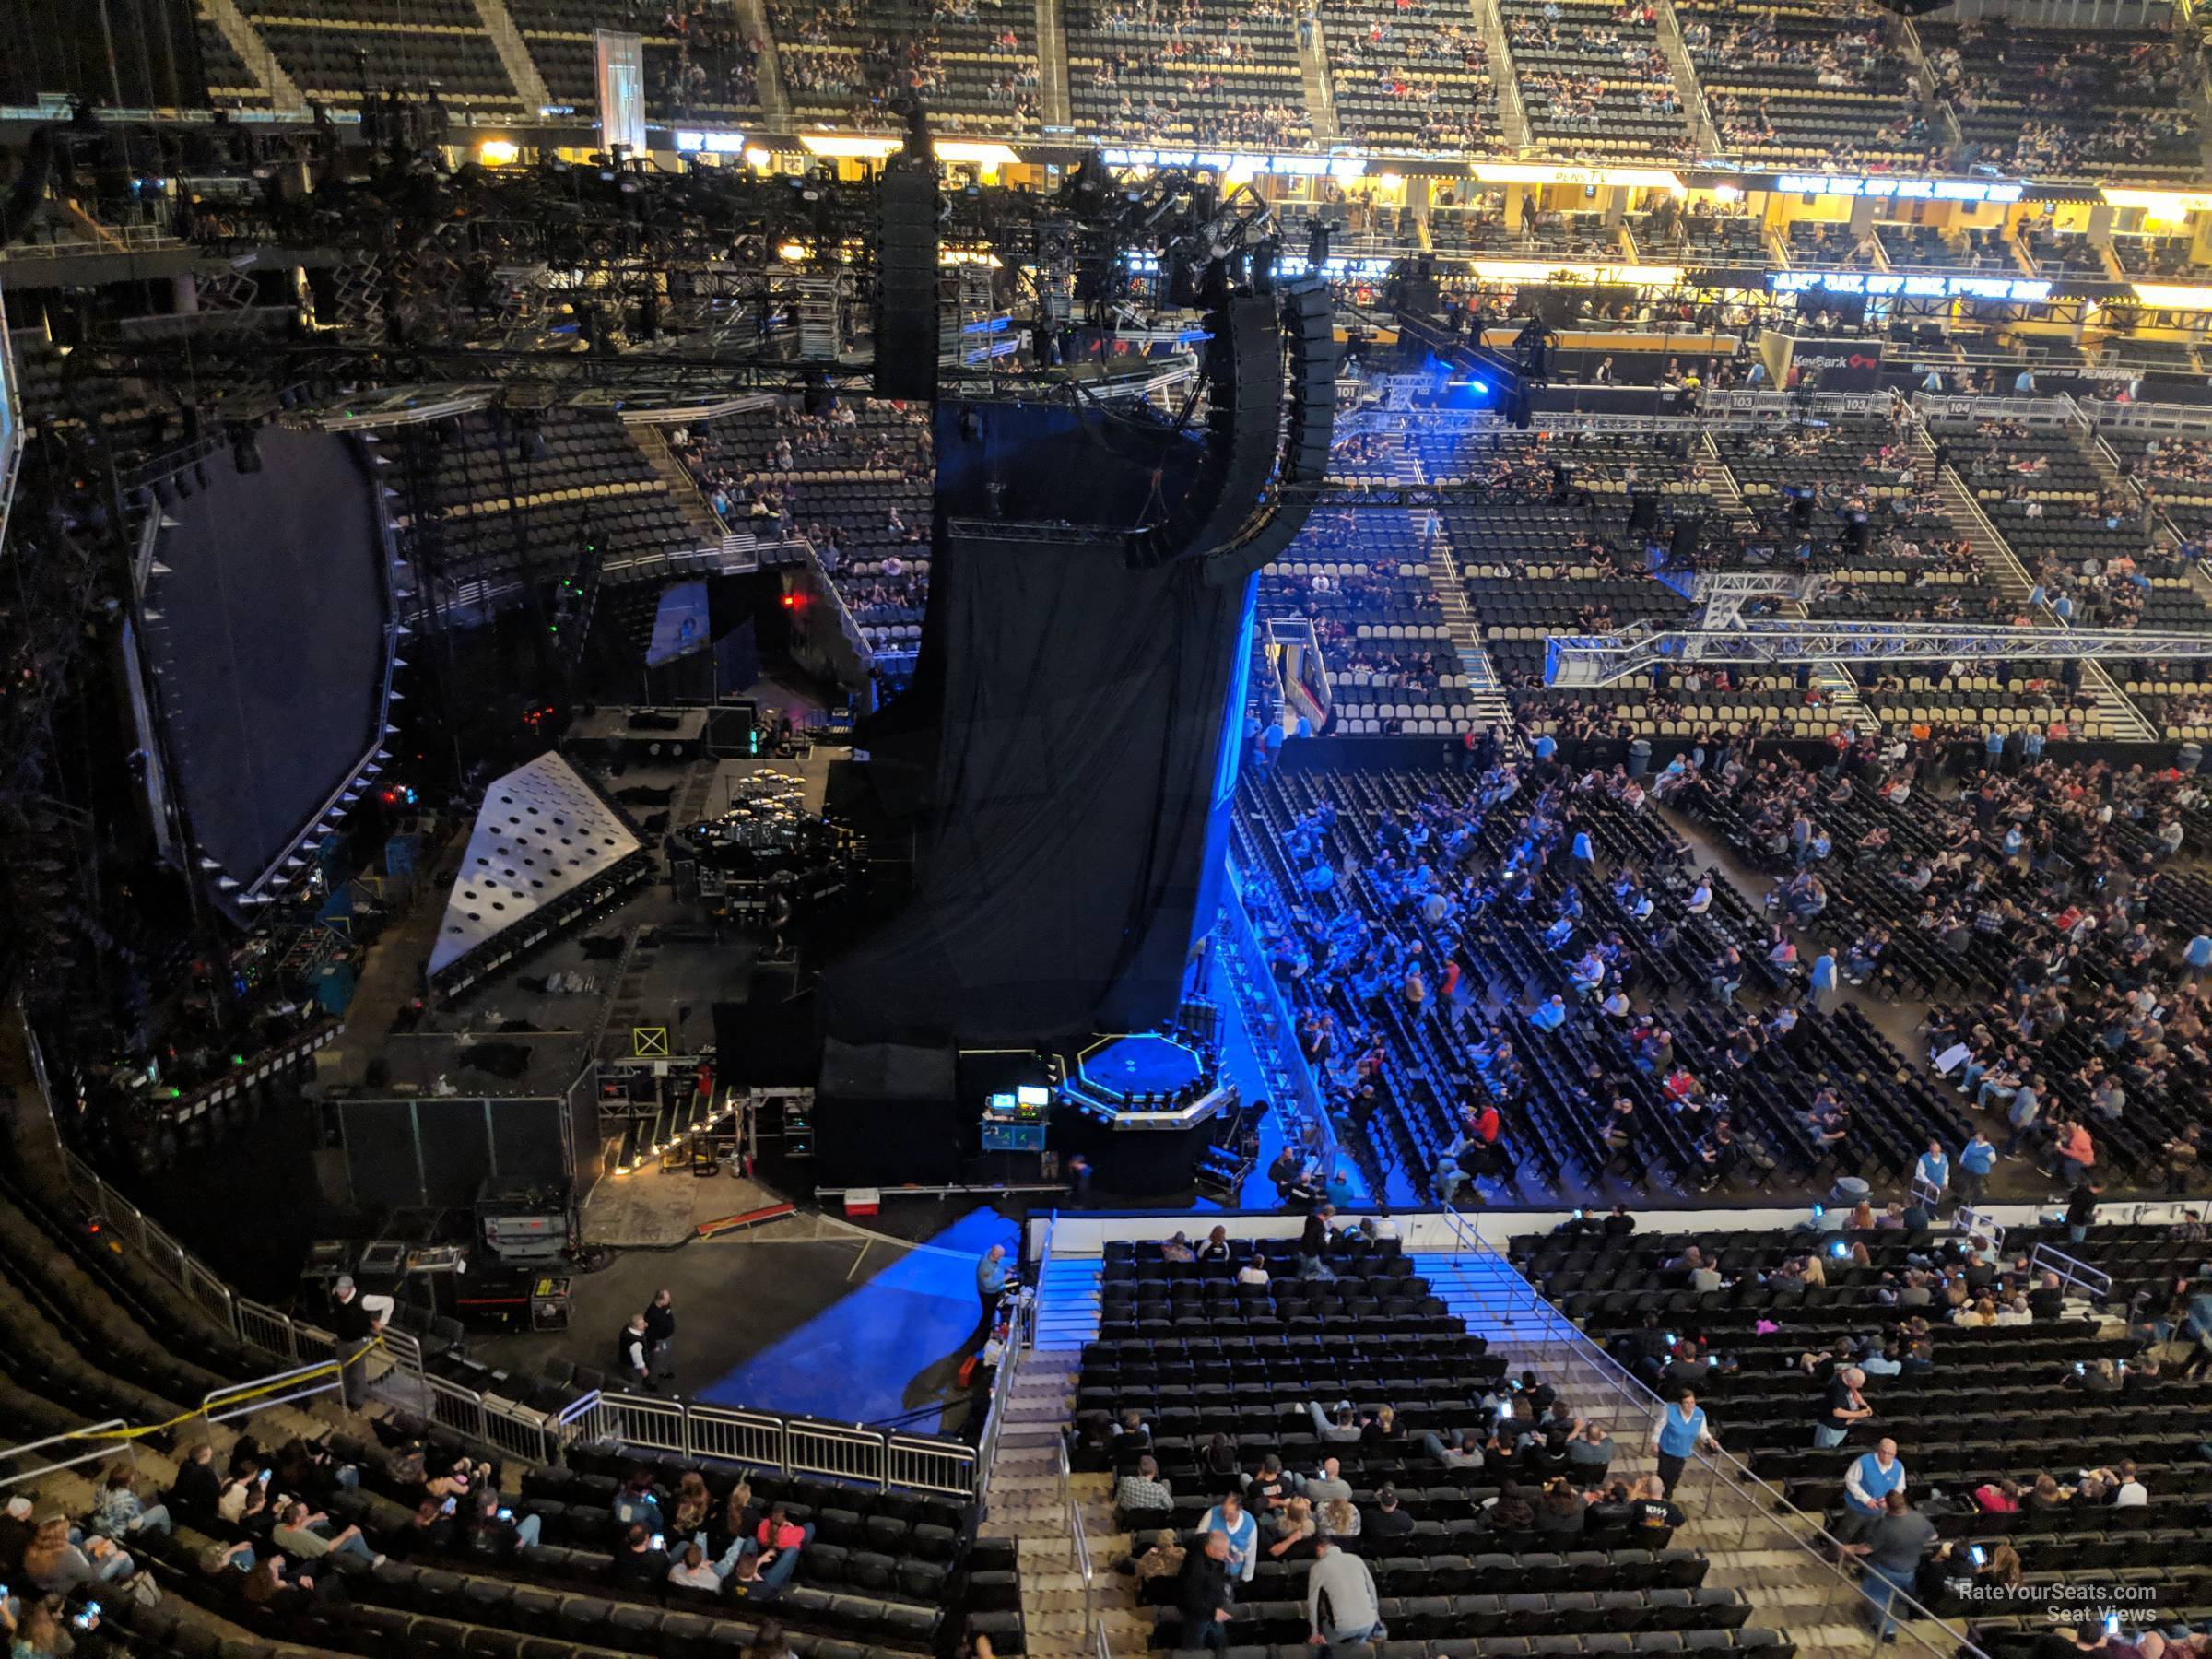 section 222, row c seat view  for concert - ppg paints arena